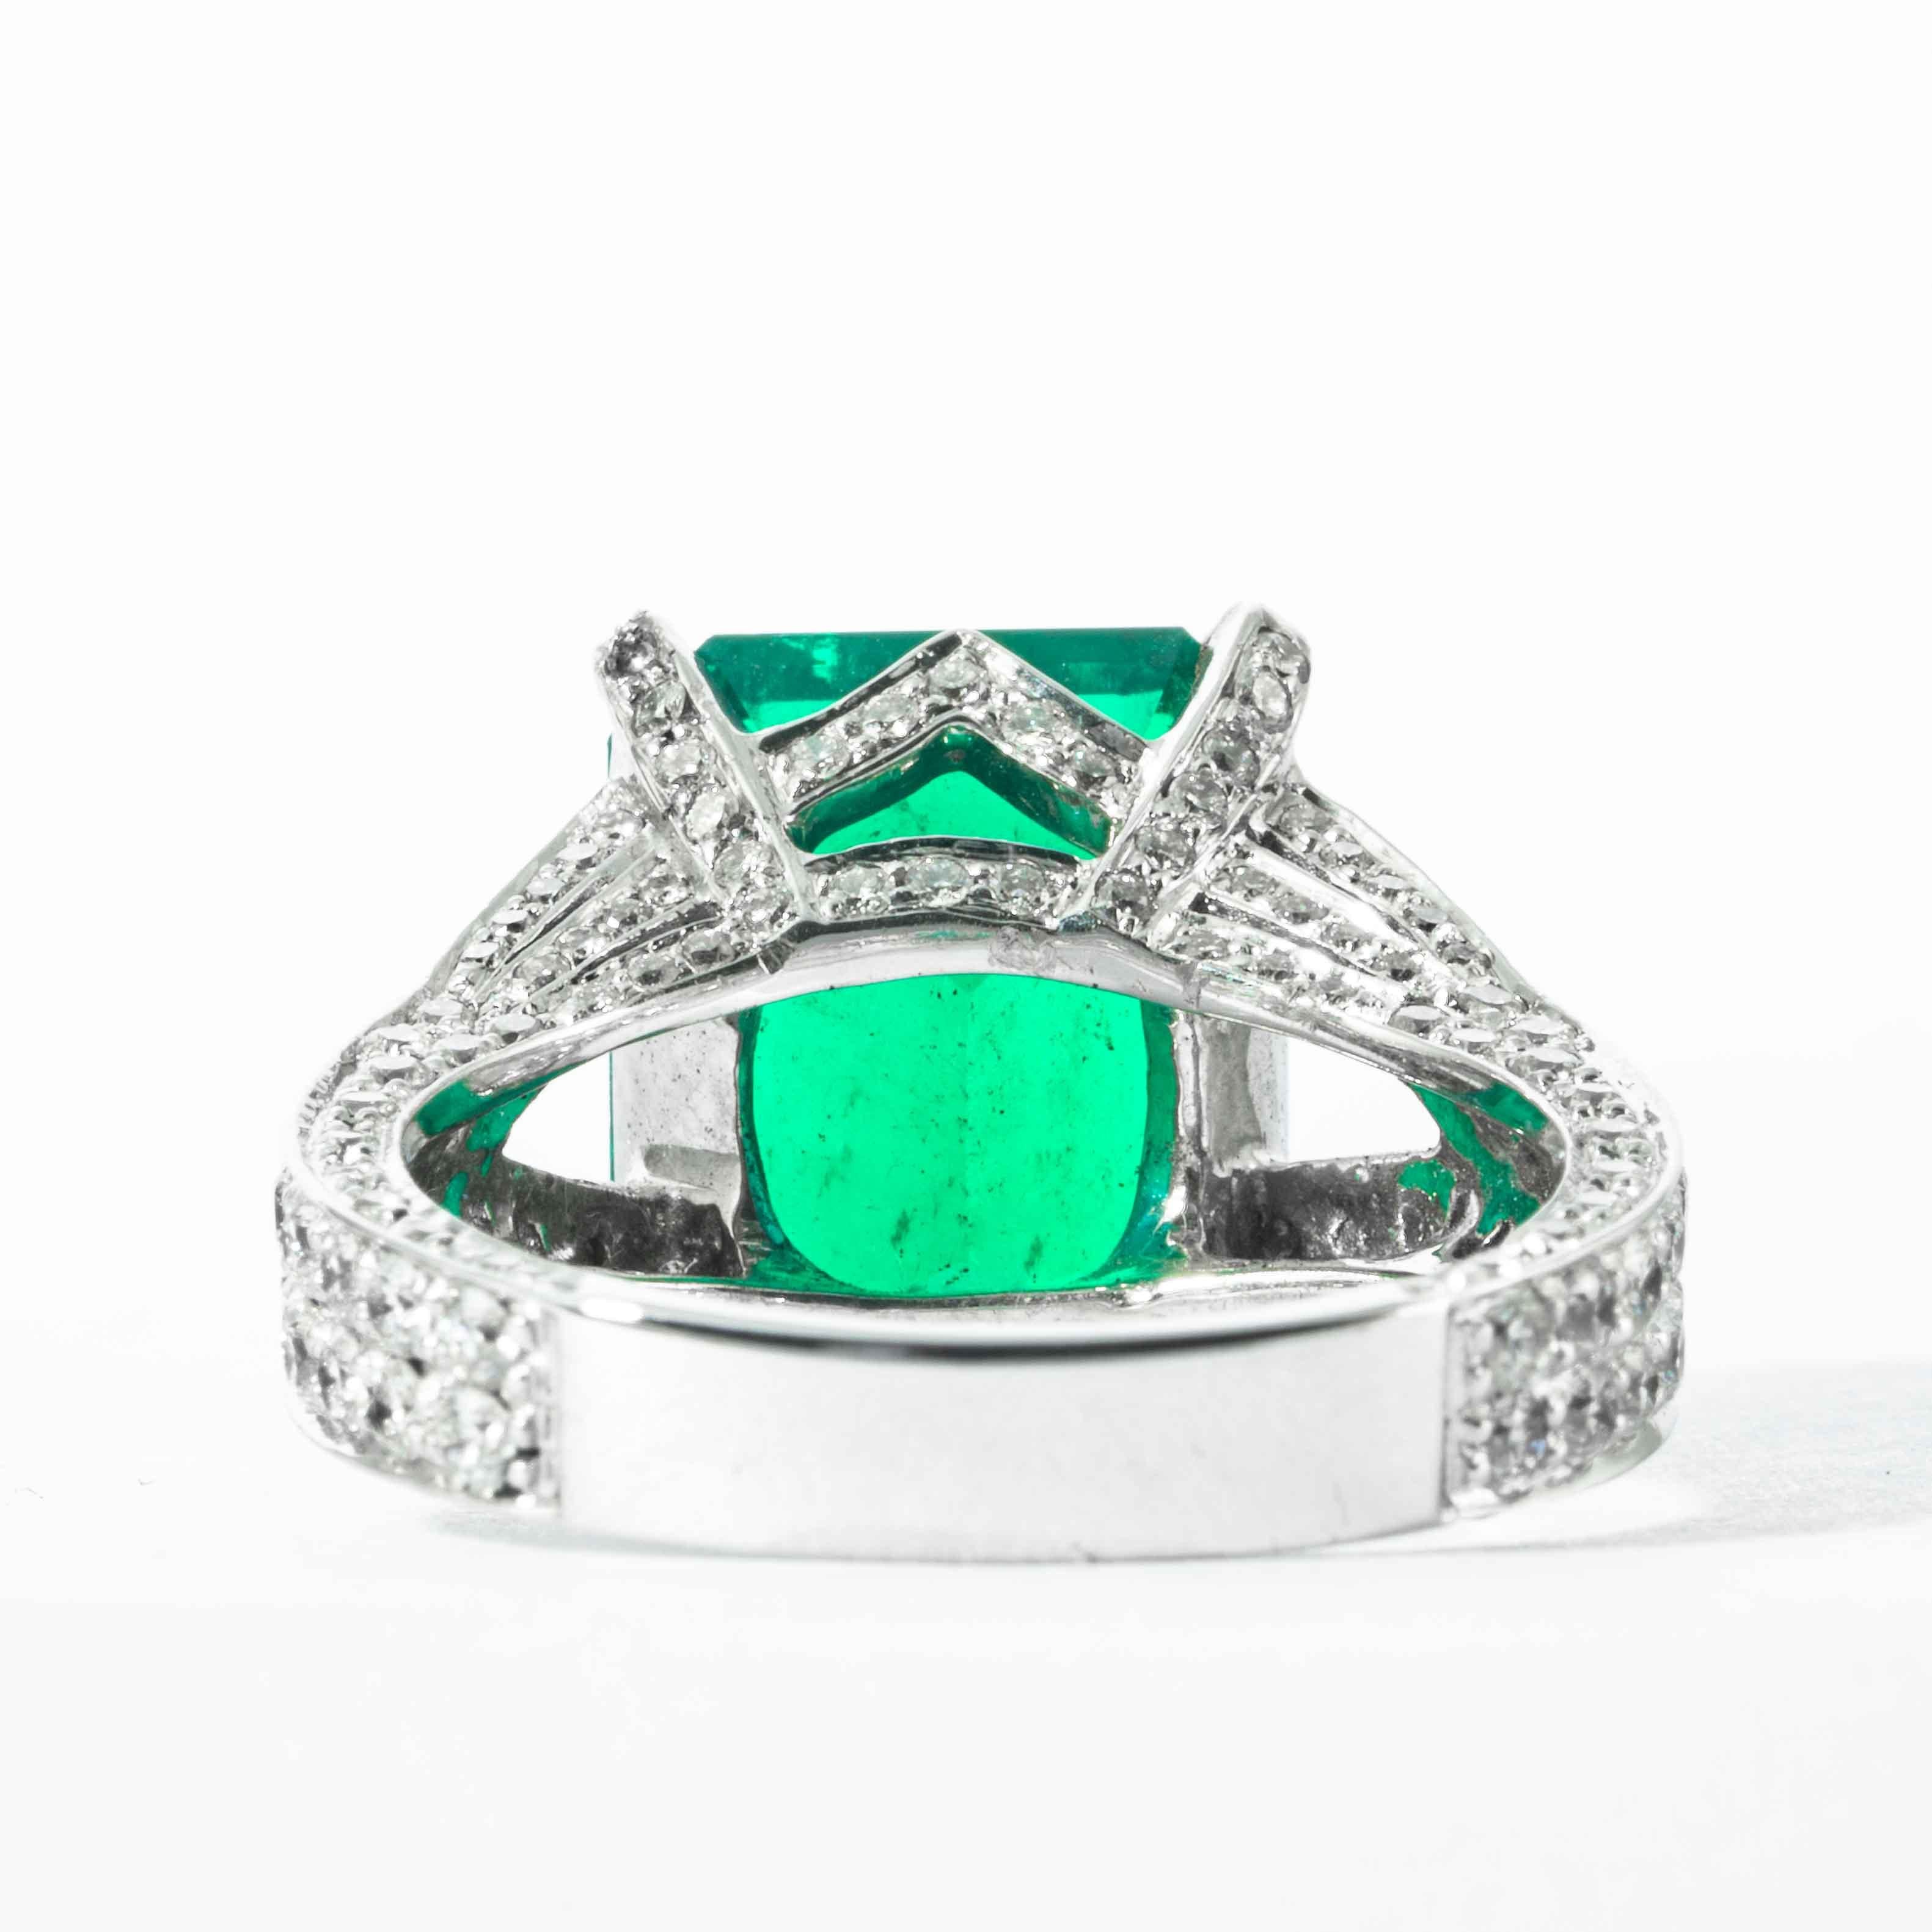 Emerald Cut Shreve, Crump & Low 6.25 Carat Colombian Emerald and Diamond White Gold Ring For Sale